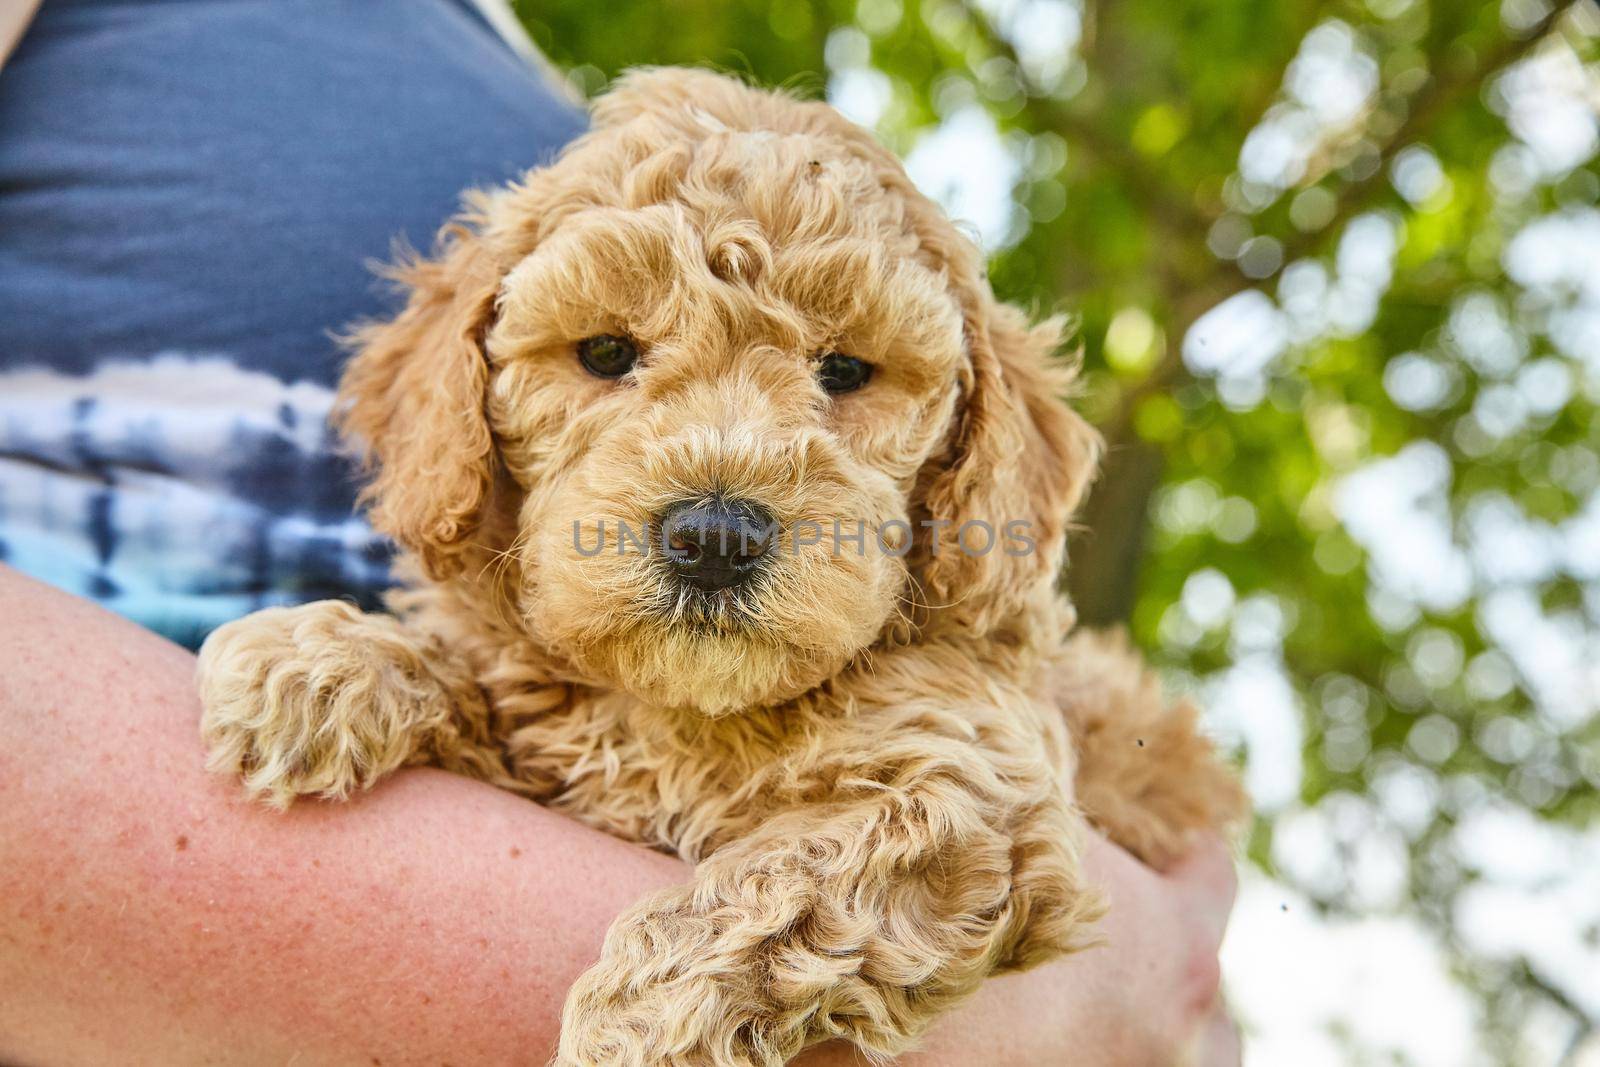 Image of Woman holding Goldendoodle puppy in her arms